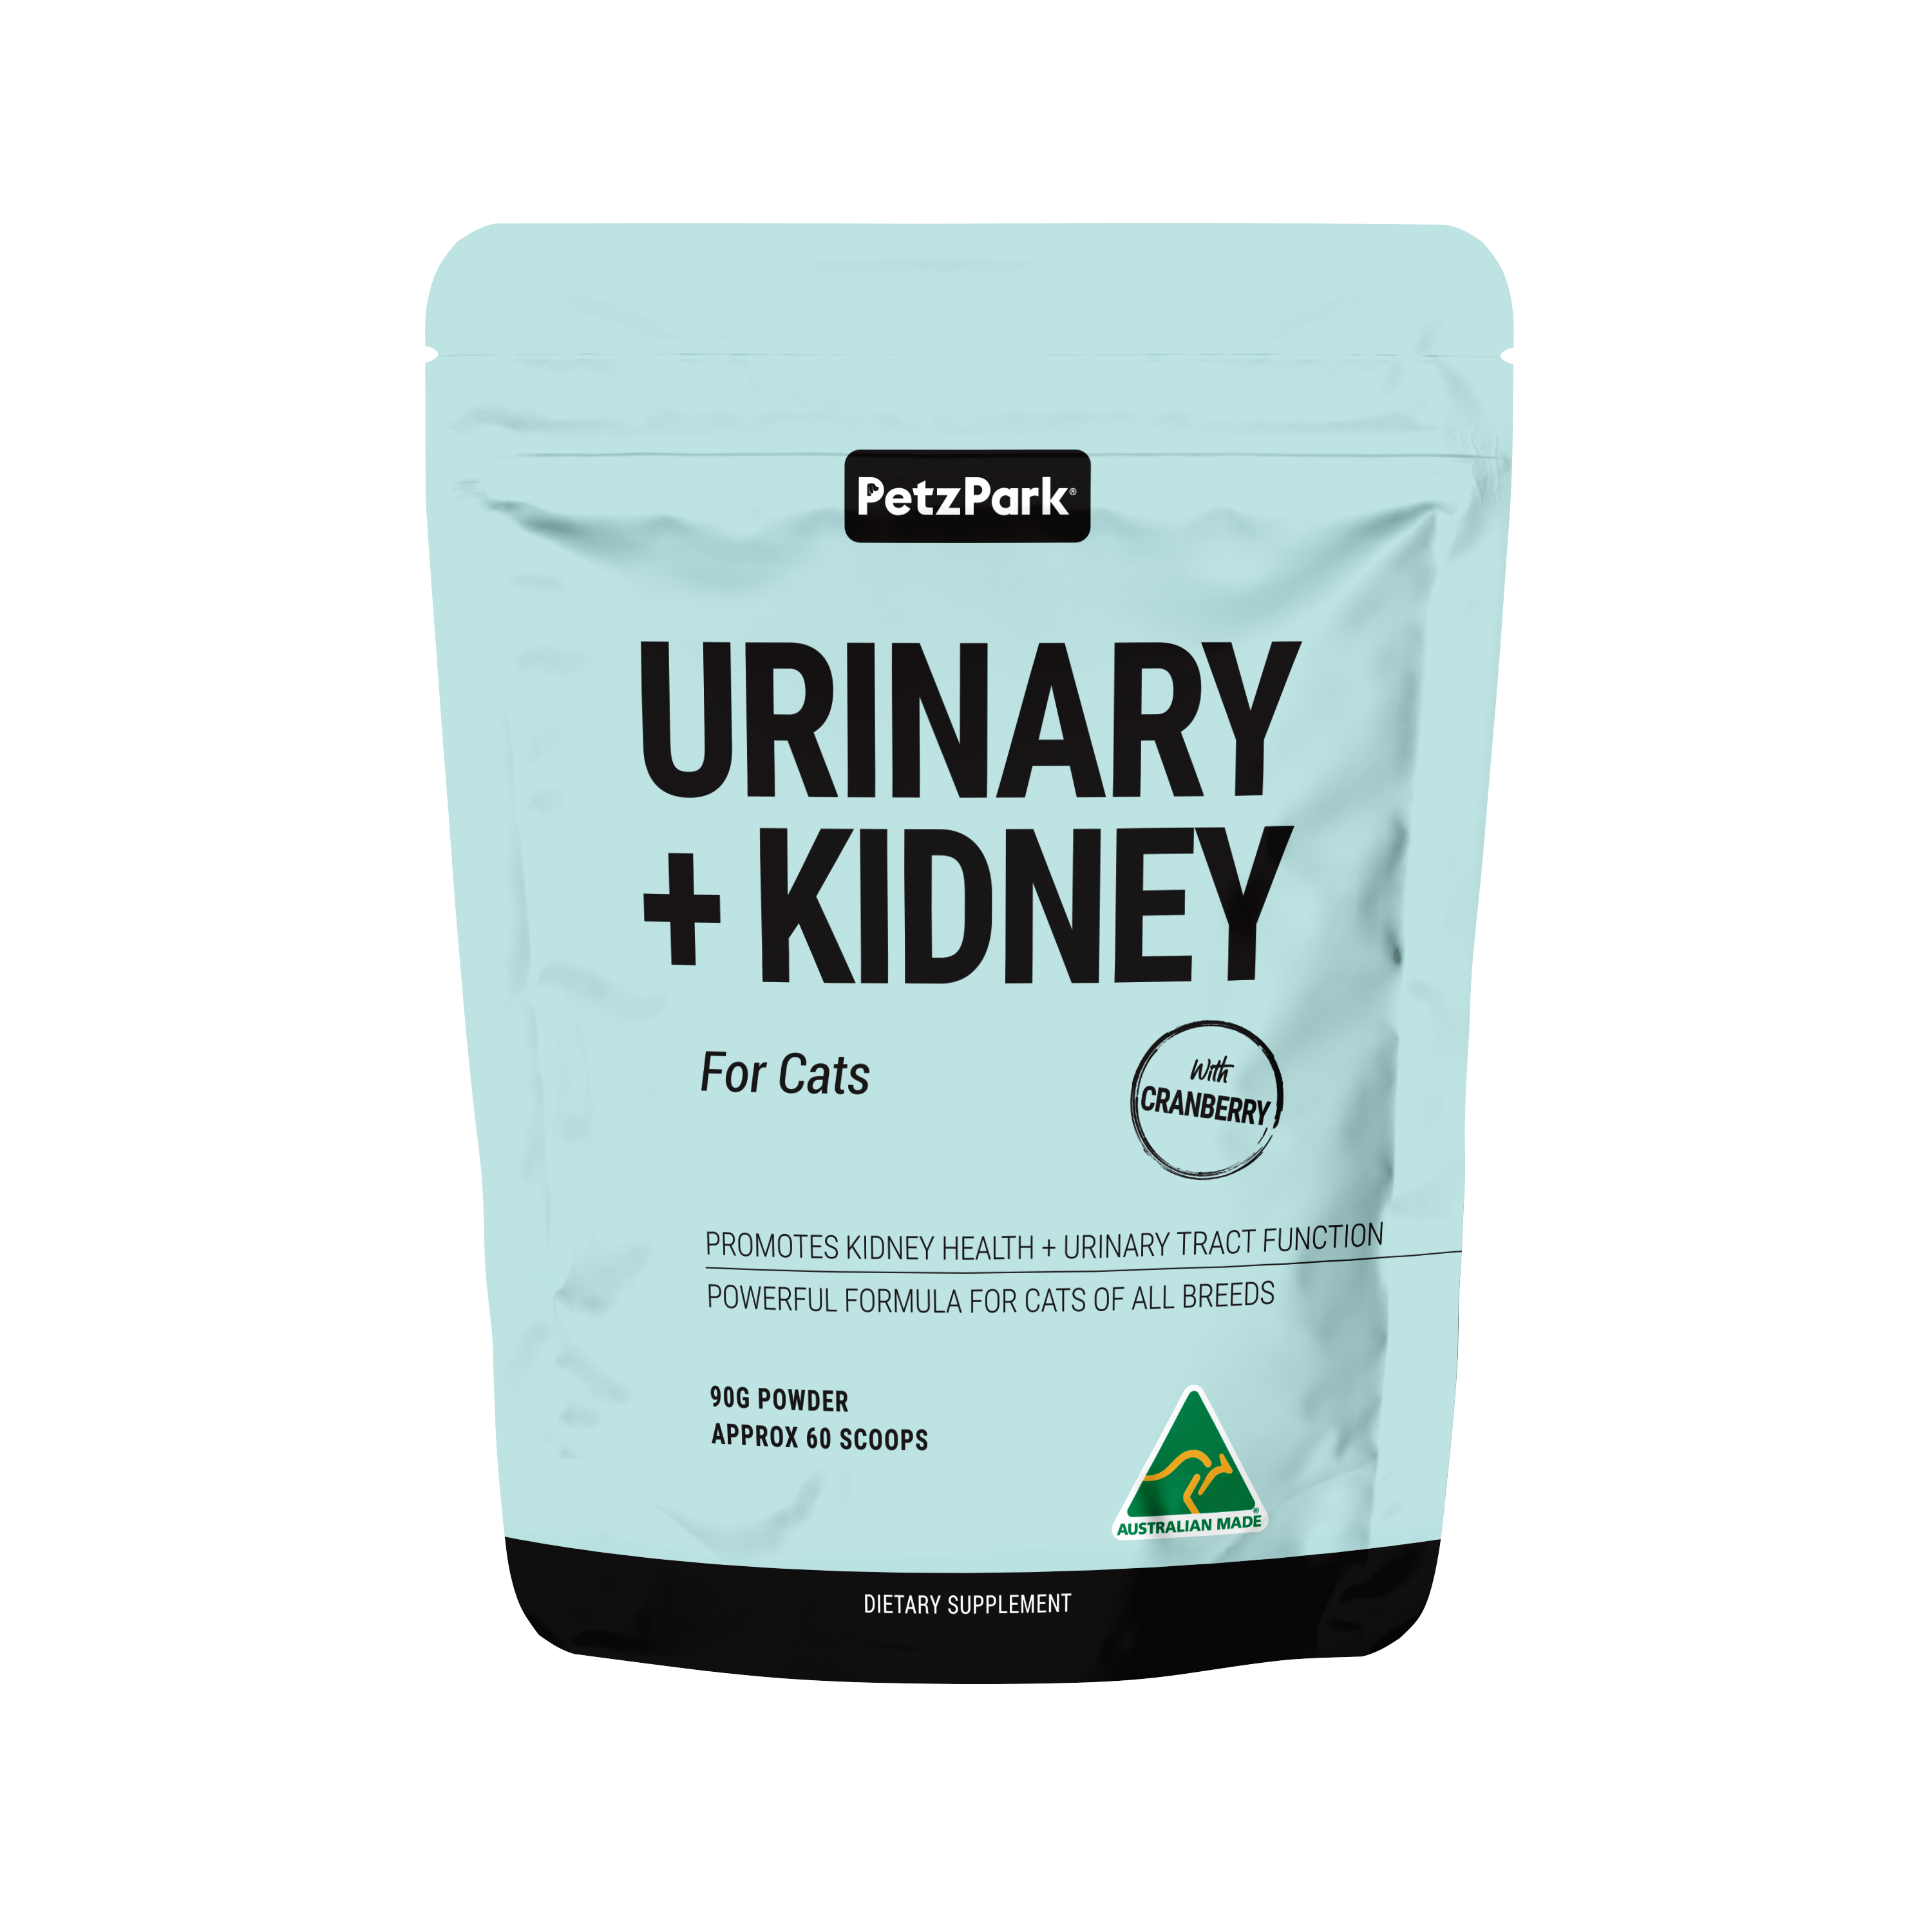 Petz Park Urinary + Kidney for Cats, powder supplement against UTIs, bladder stones, incontinence, and kidney disease. 